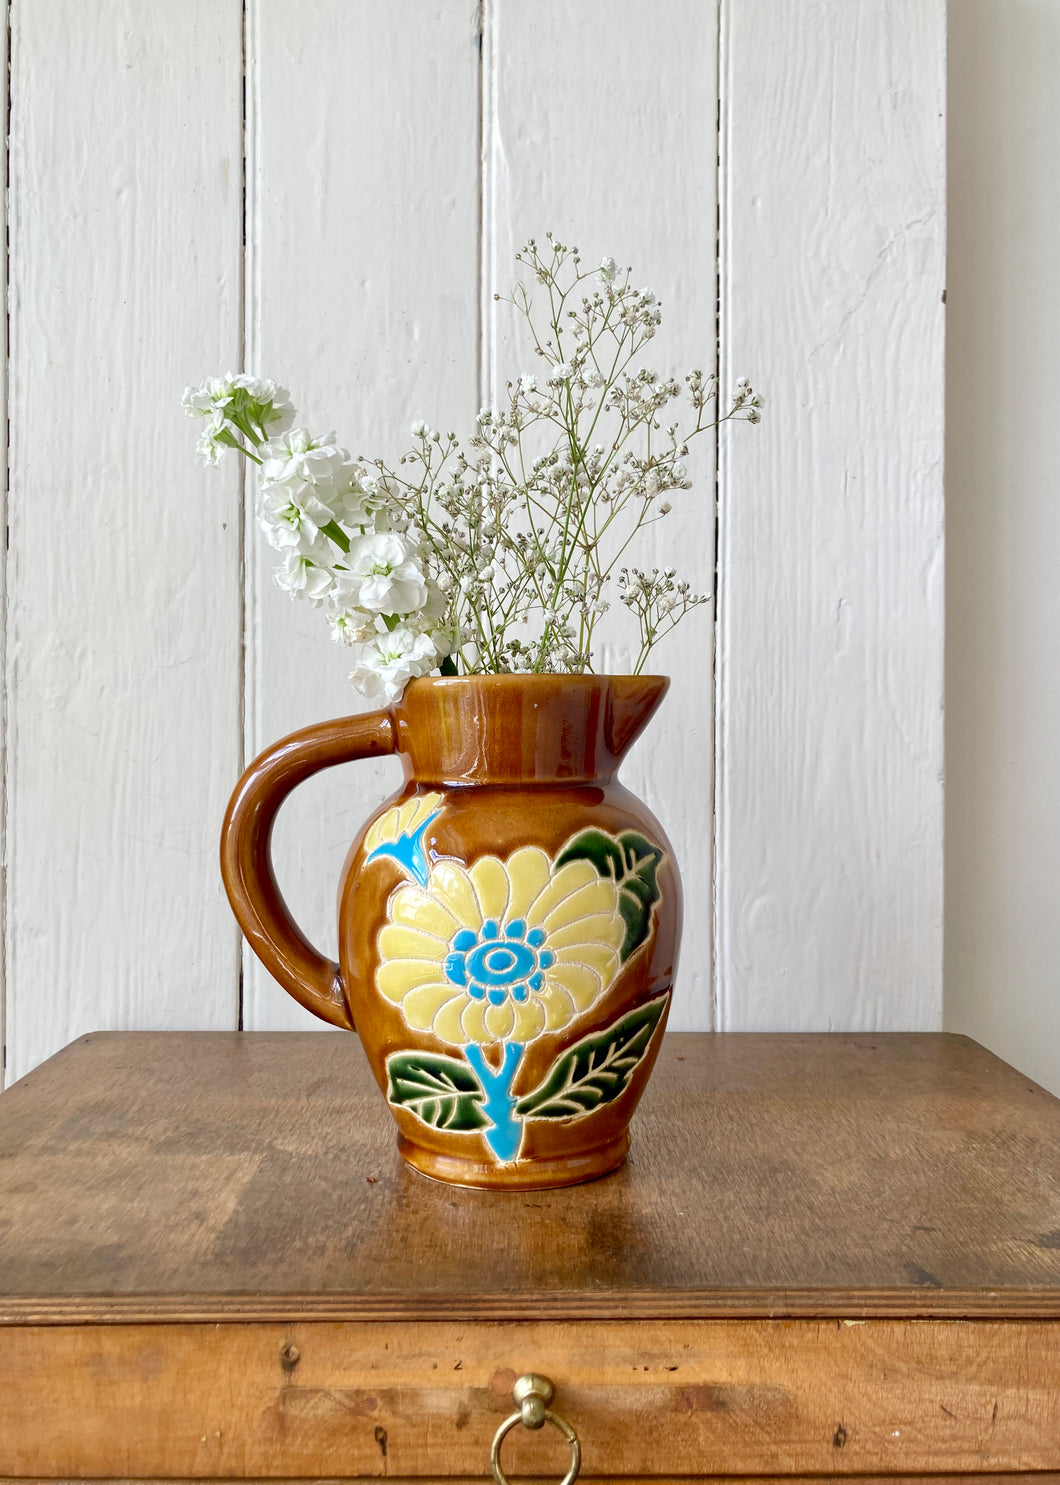 Amber jug with scraffito floral decoration